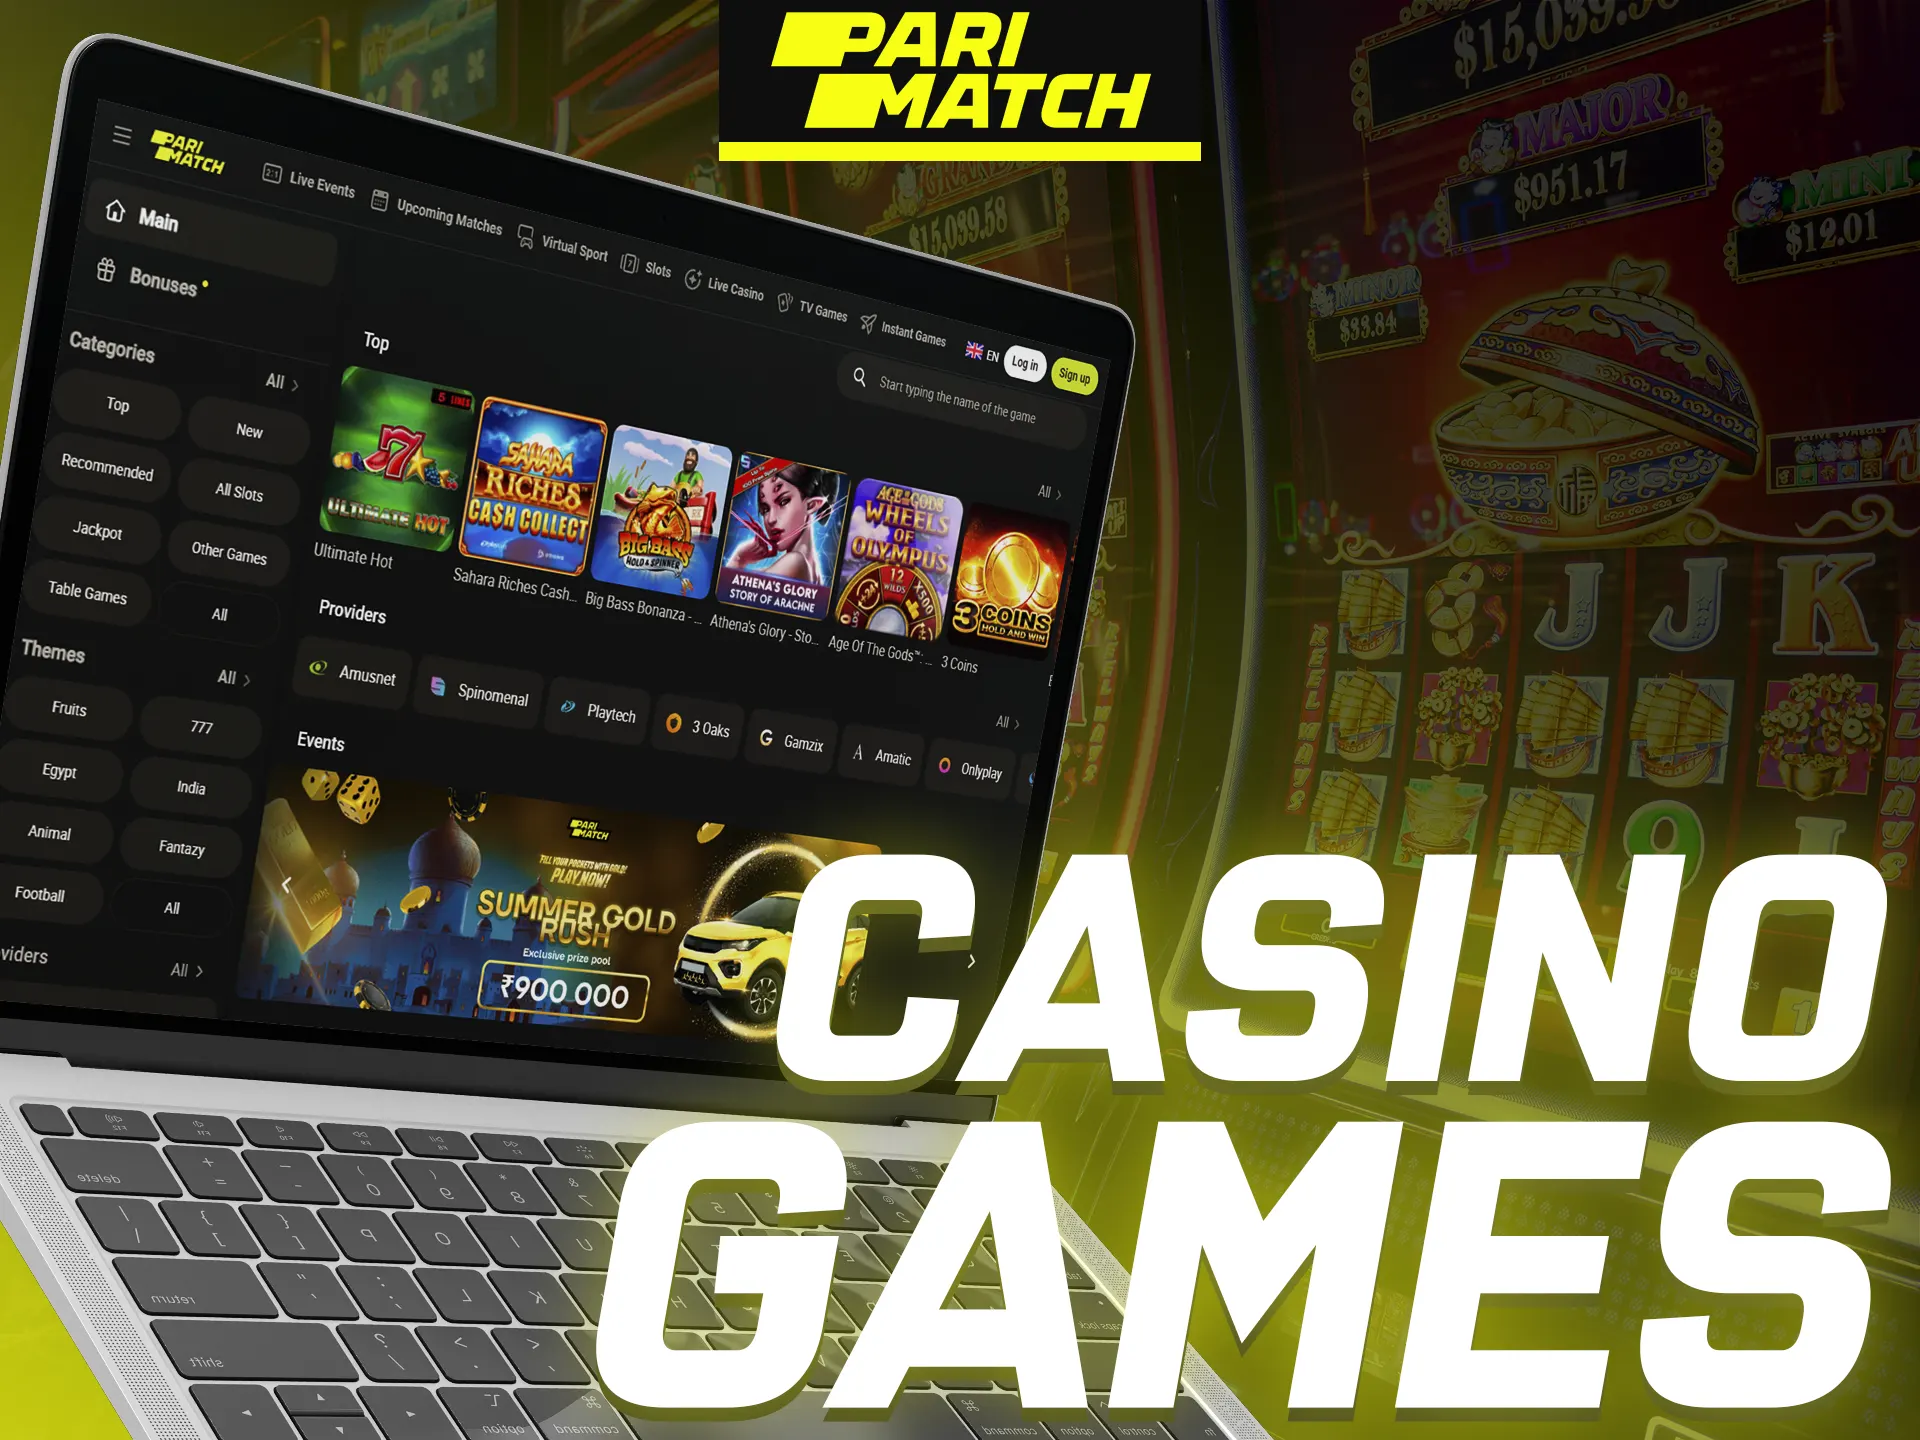 Thanks to the constant introduction of new games, the Parimatch casino department offers a wide range of games.